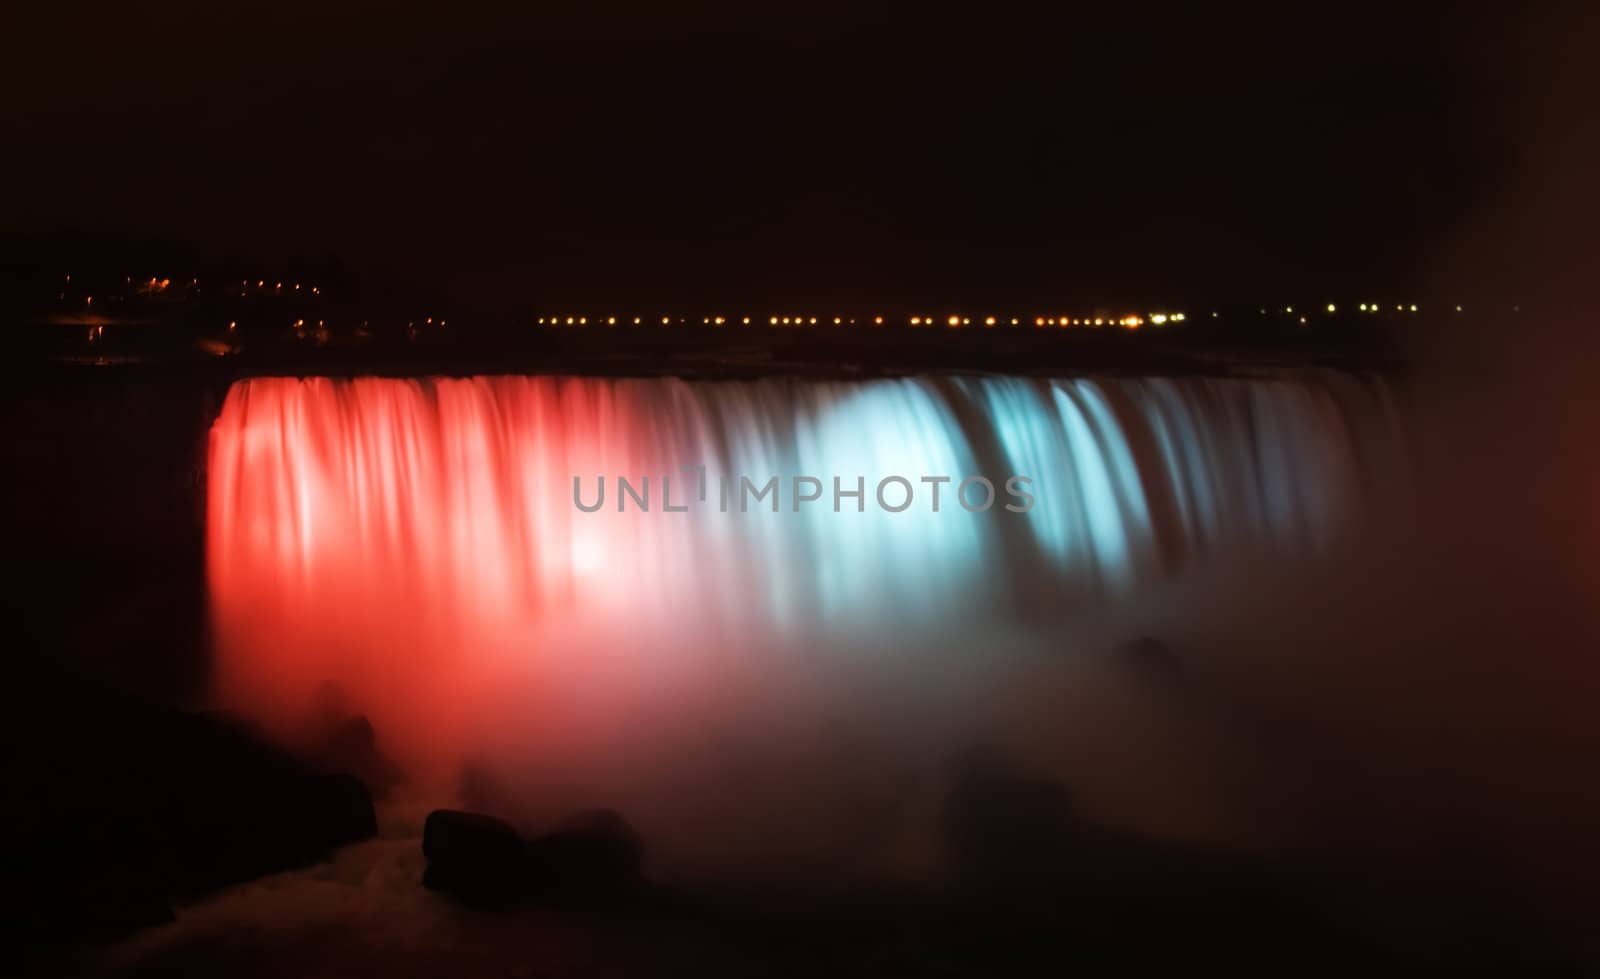 Night shot of Niagrar falls really nice colors reds and blues